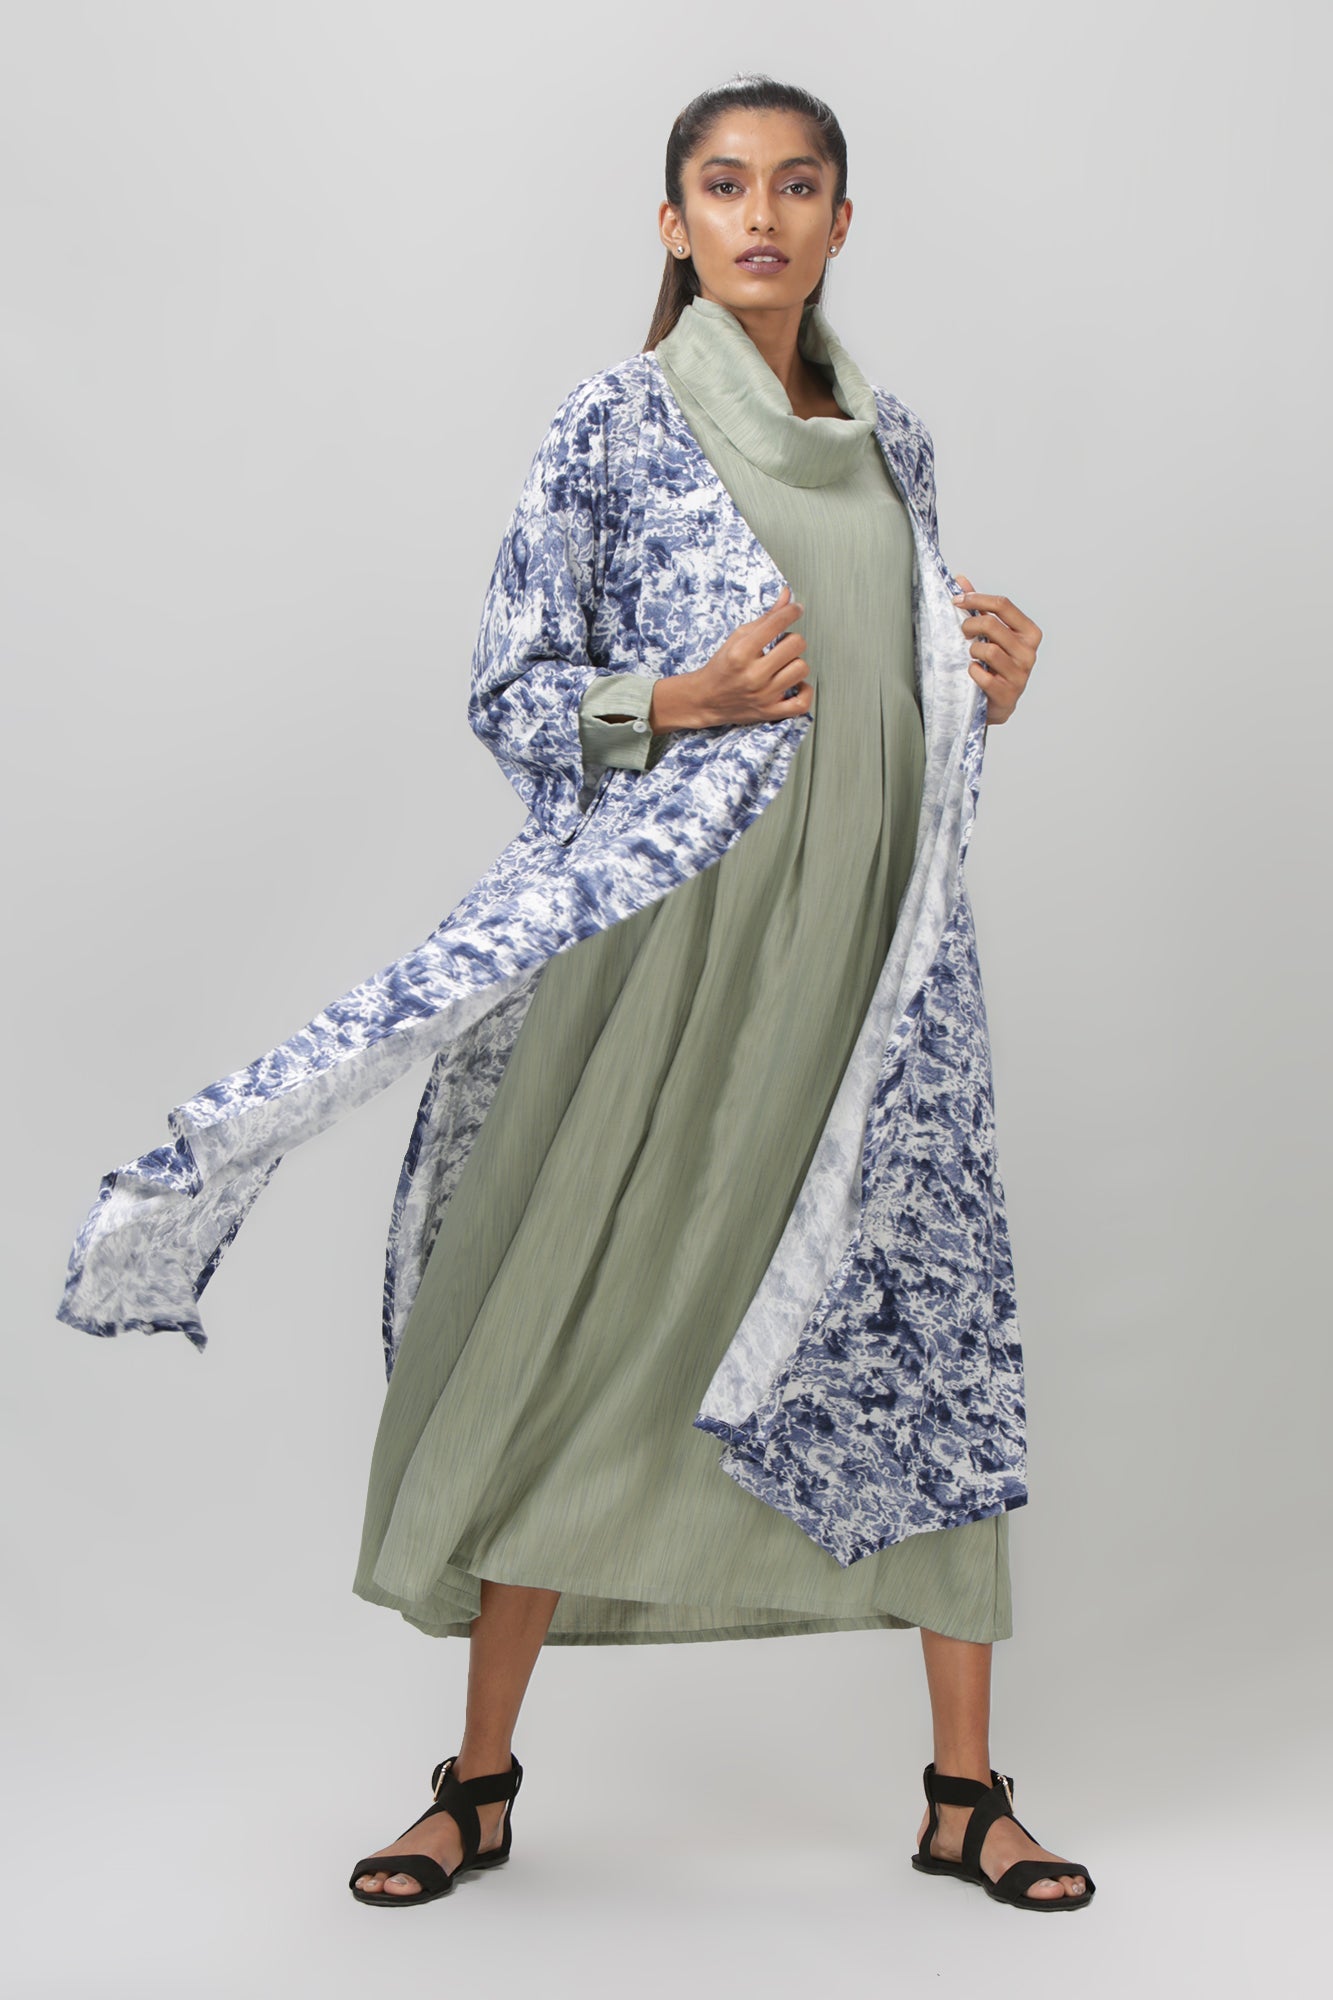 Green cowl neck dress with blue and white shrug - WomanLikeU